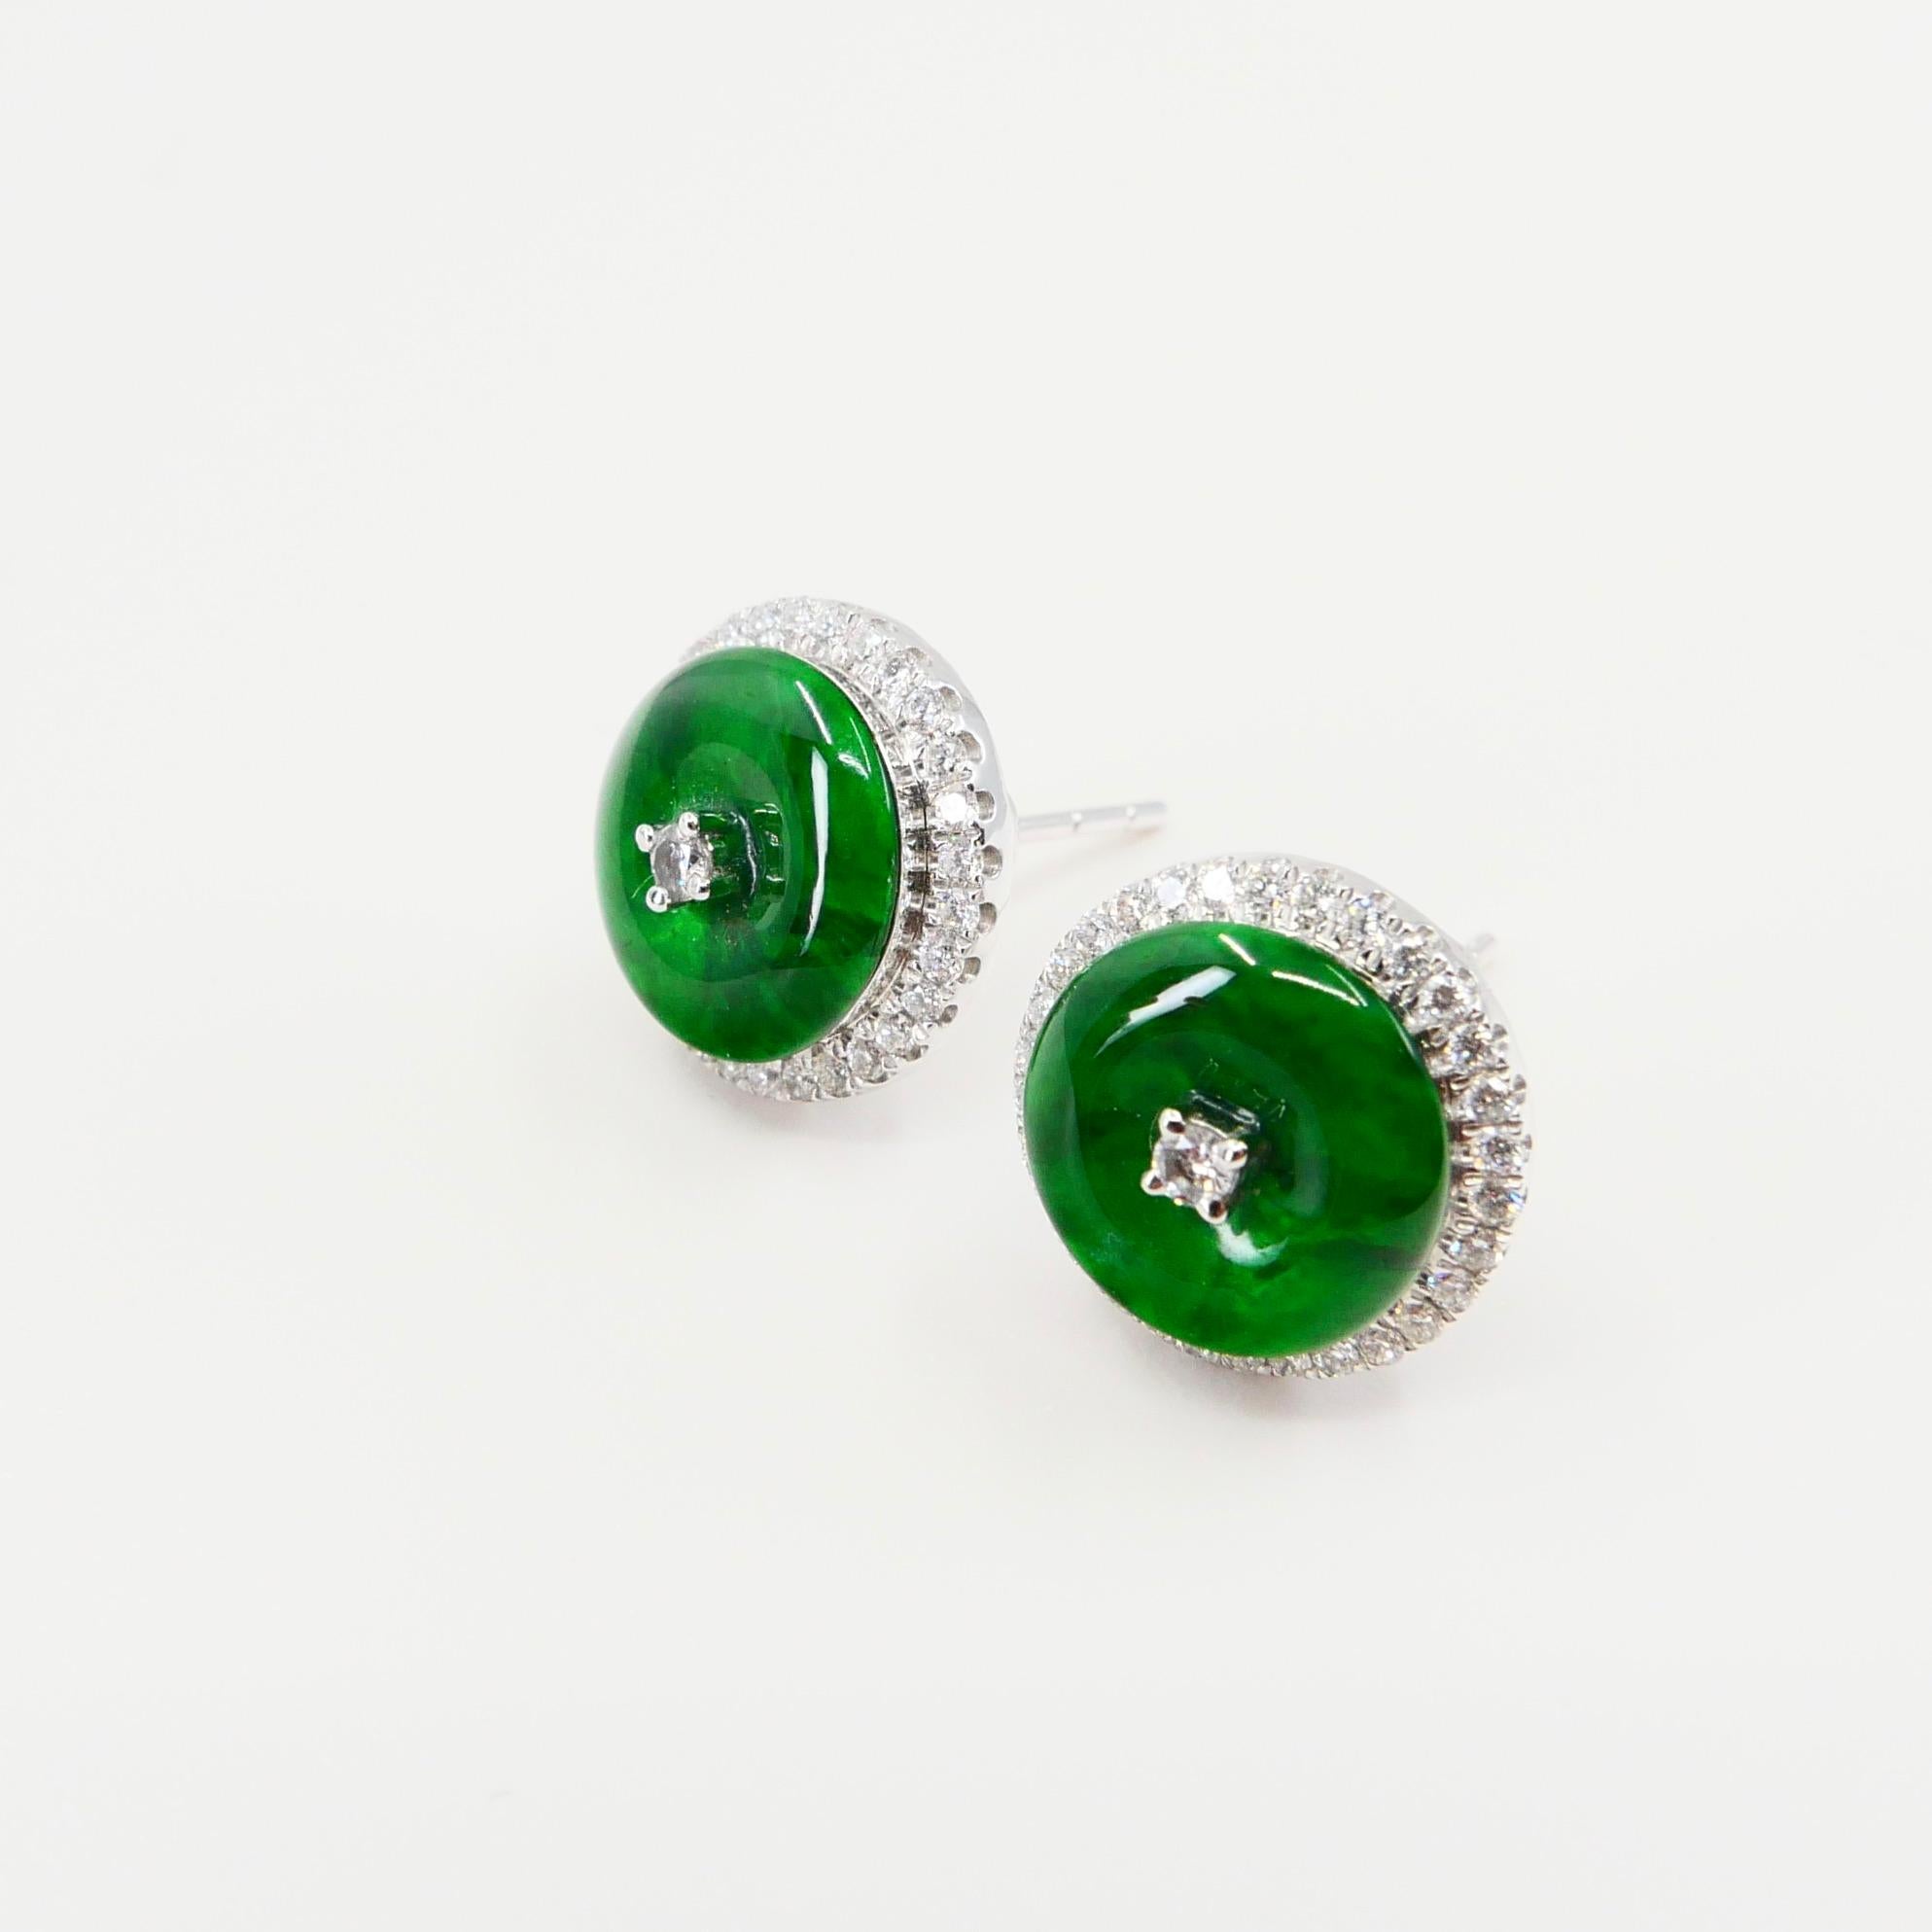 Certified Natural Type A Jadeite Jade and Diamond Earrings, Spinach Green Color 1